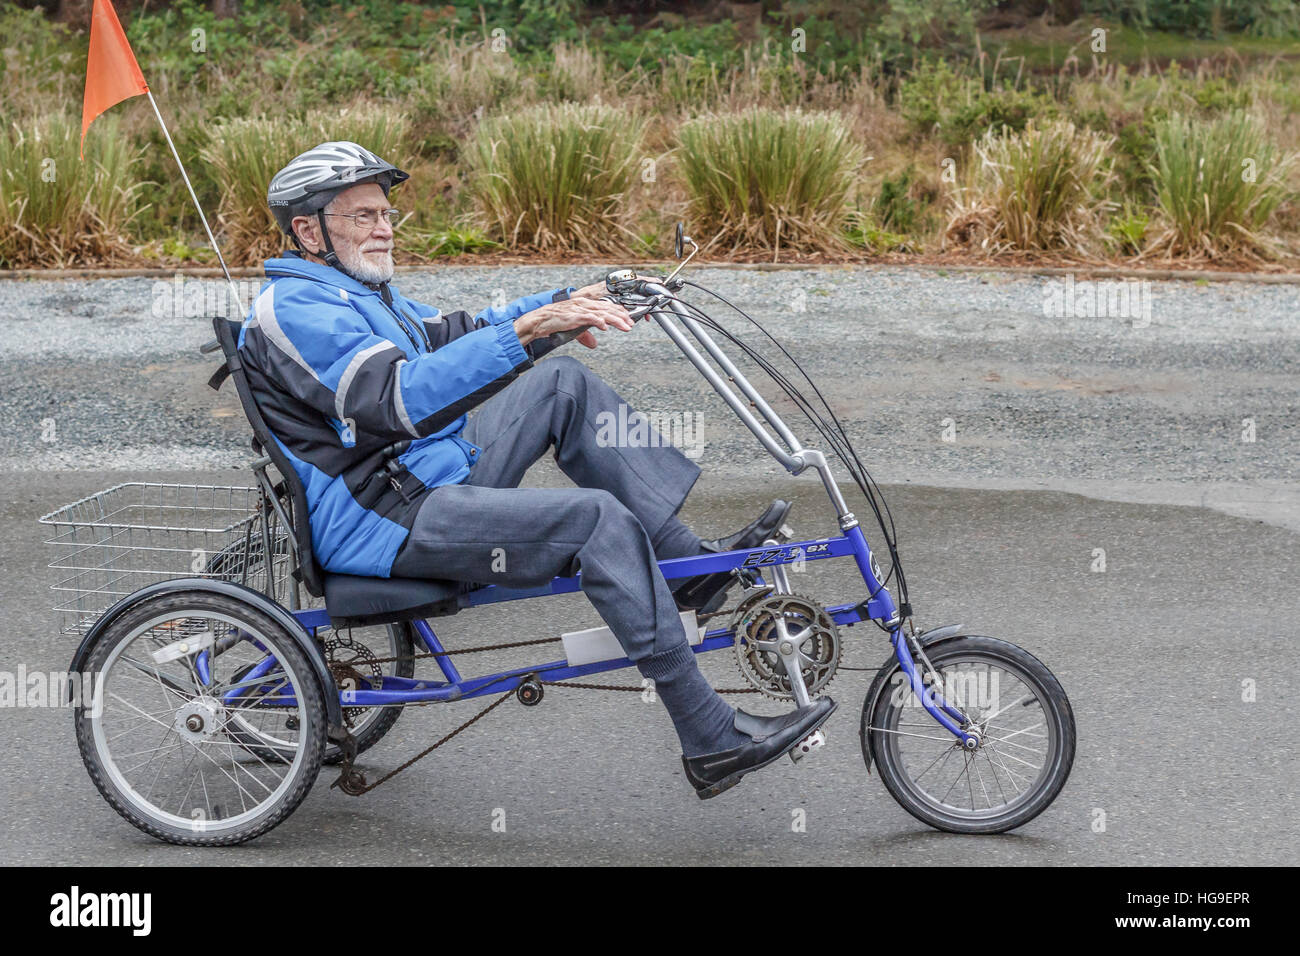 A smiling, elderly man, age 94, pedals a recumbent tricycle along a driveway, equipped with a helmet, flag and other safety gear. Stock Photo